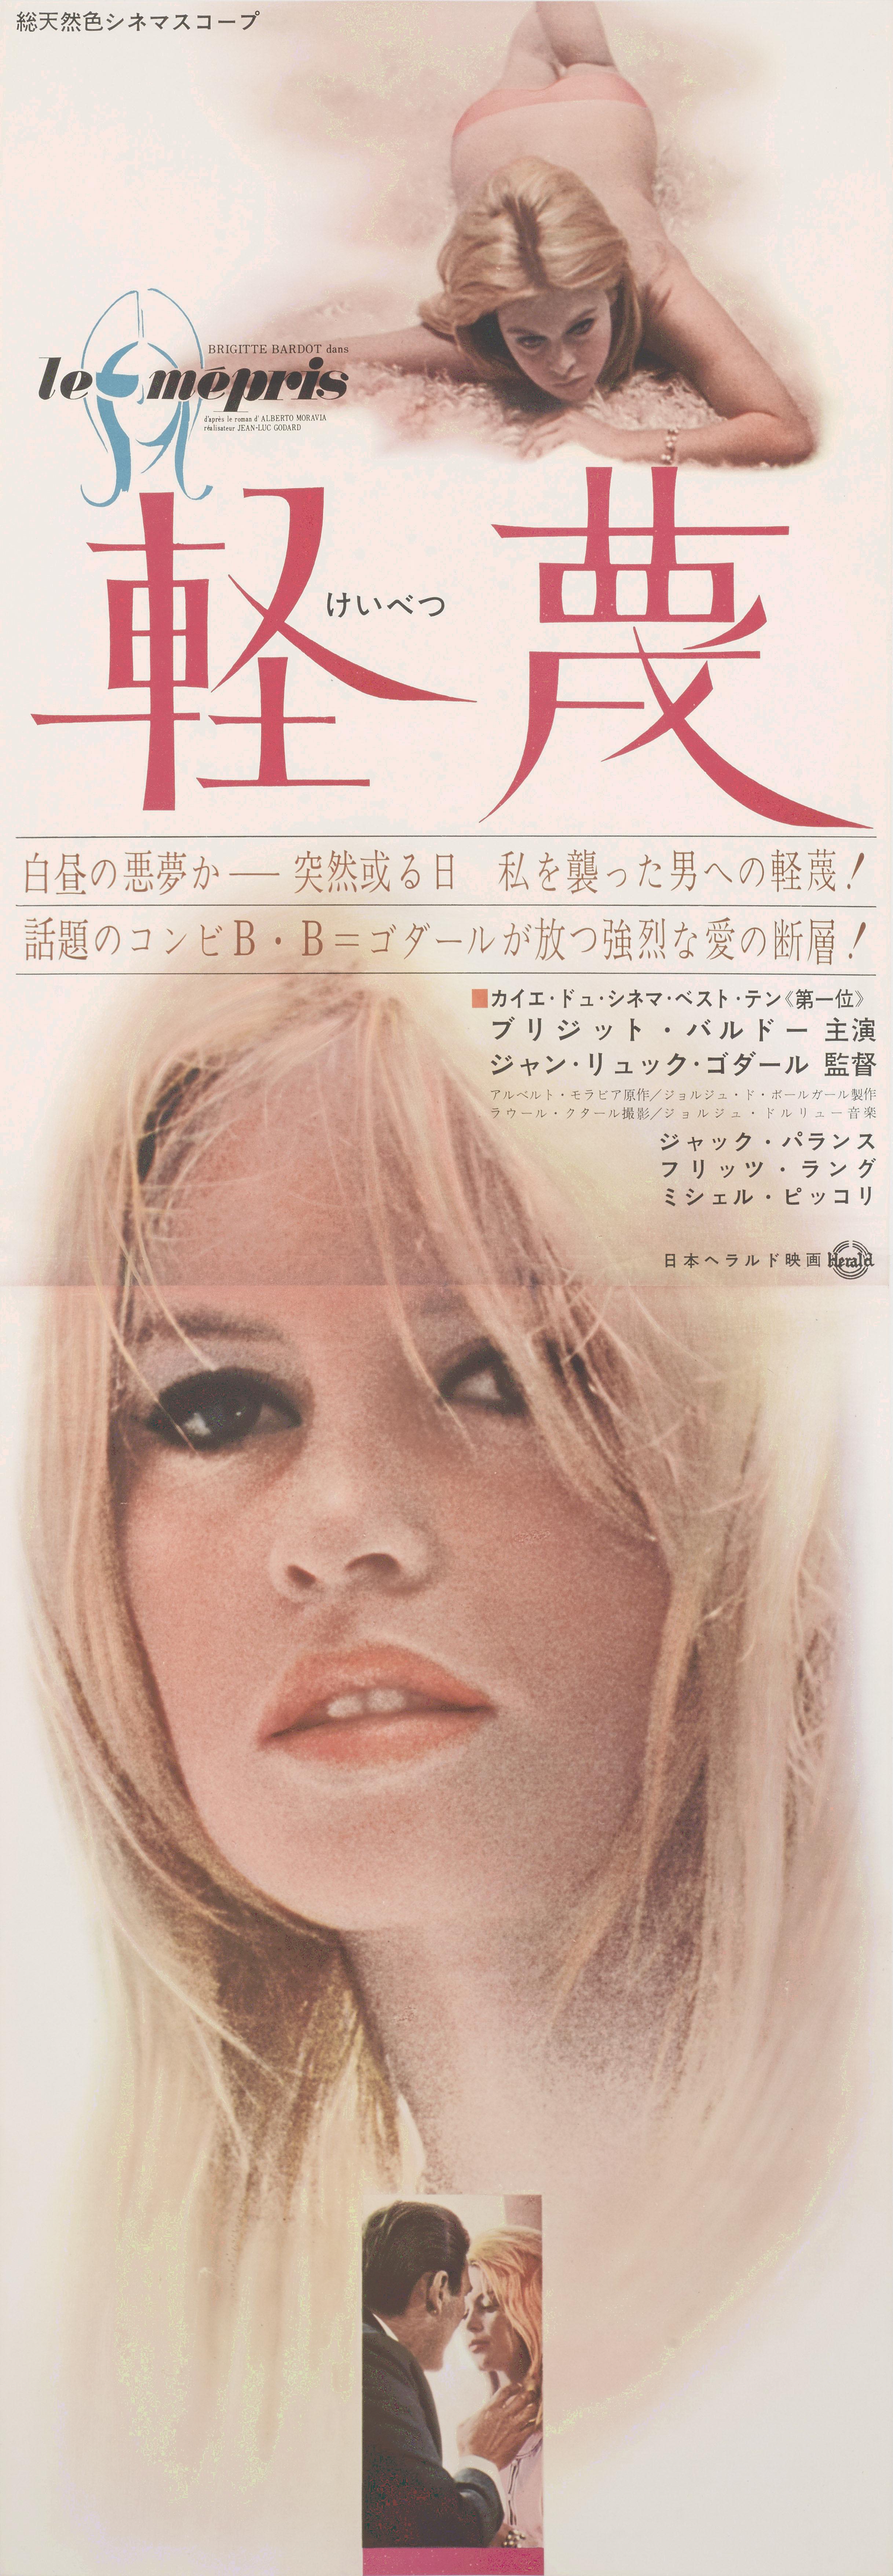 Original Japanese film poster for the 1963 French New Wave film directed by Jean-Luc Godard and staring Brigitte Bardot. The artwork is unique to the films first Japanese release in 1964. This poster is the larger size Japanese and was printed in